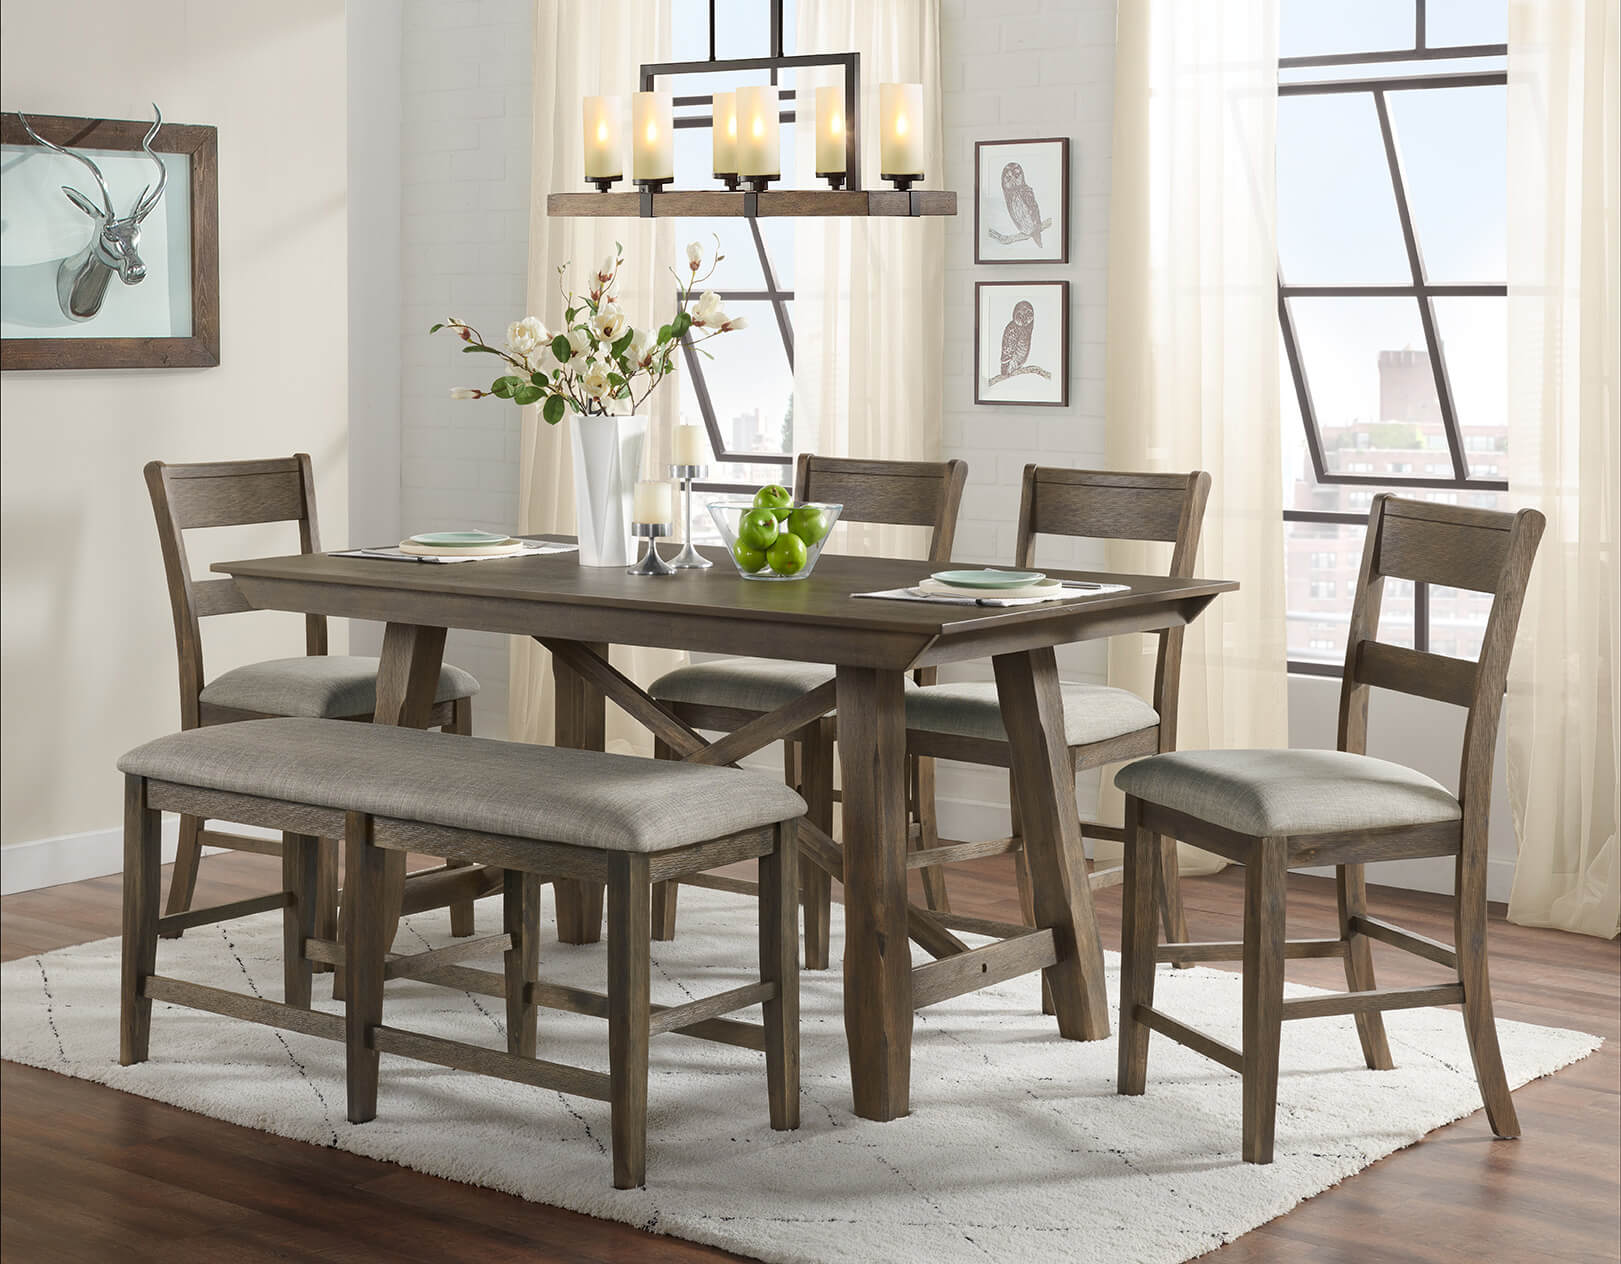 Hillcrest 6 piece dining set by Vilo Home product image